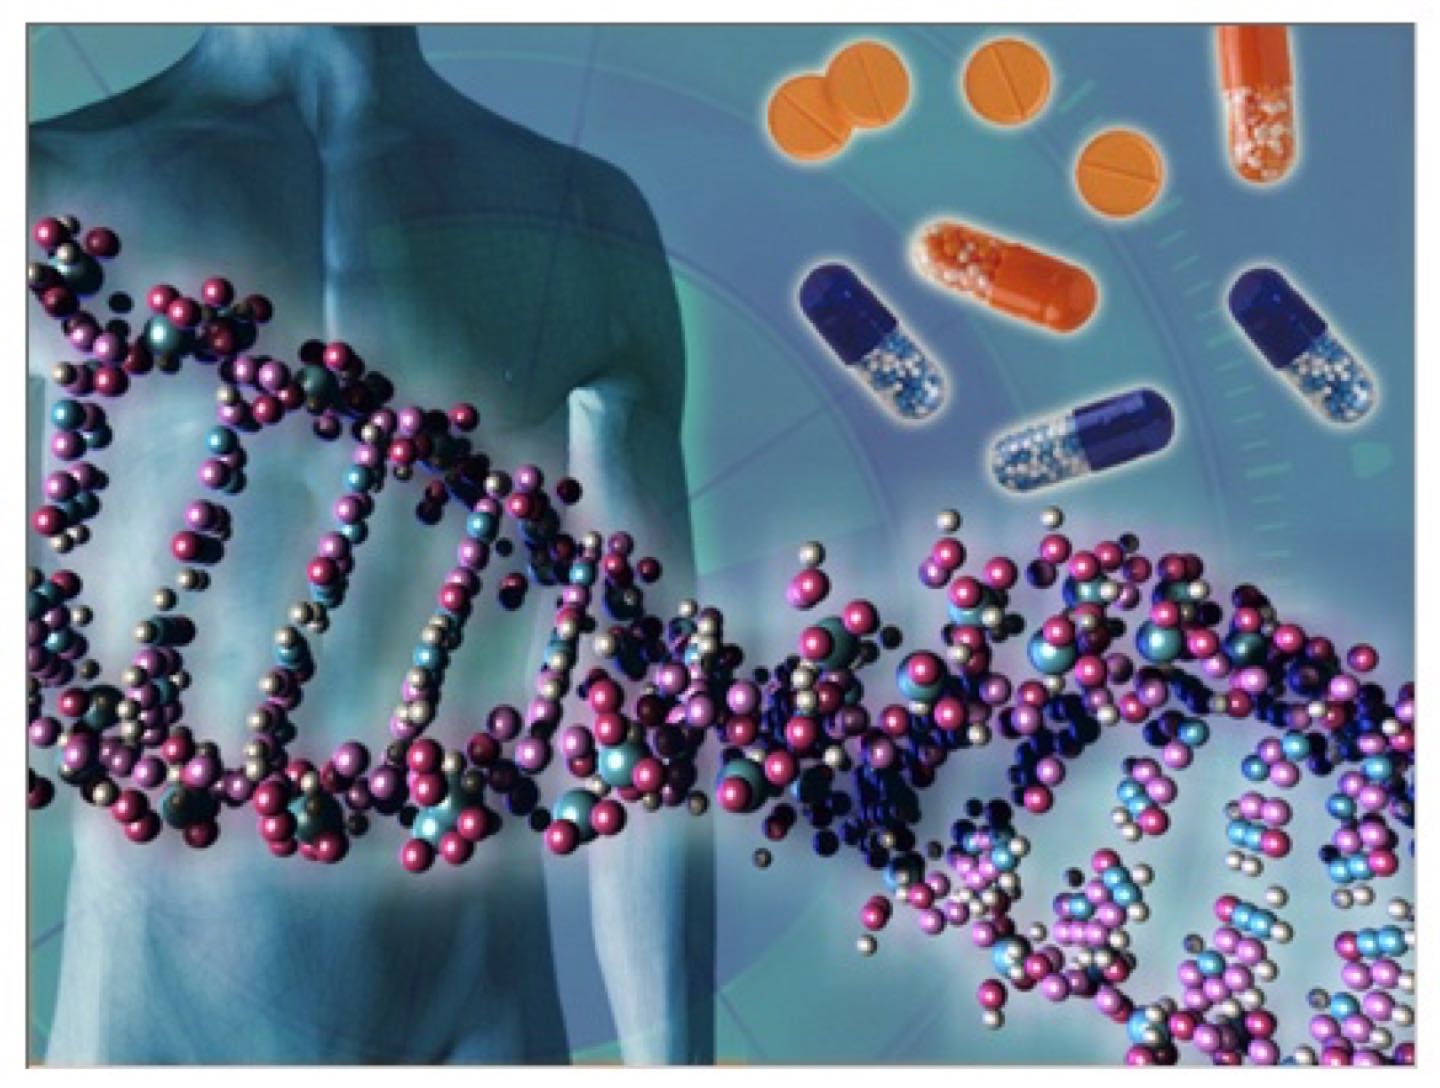 Genetic Analysis help antiaging medicine to understand our body